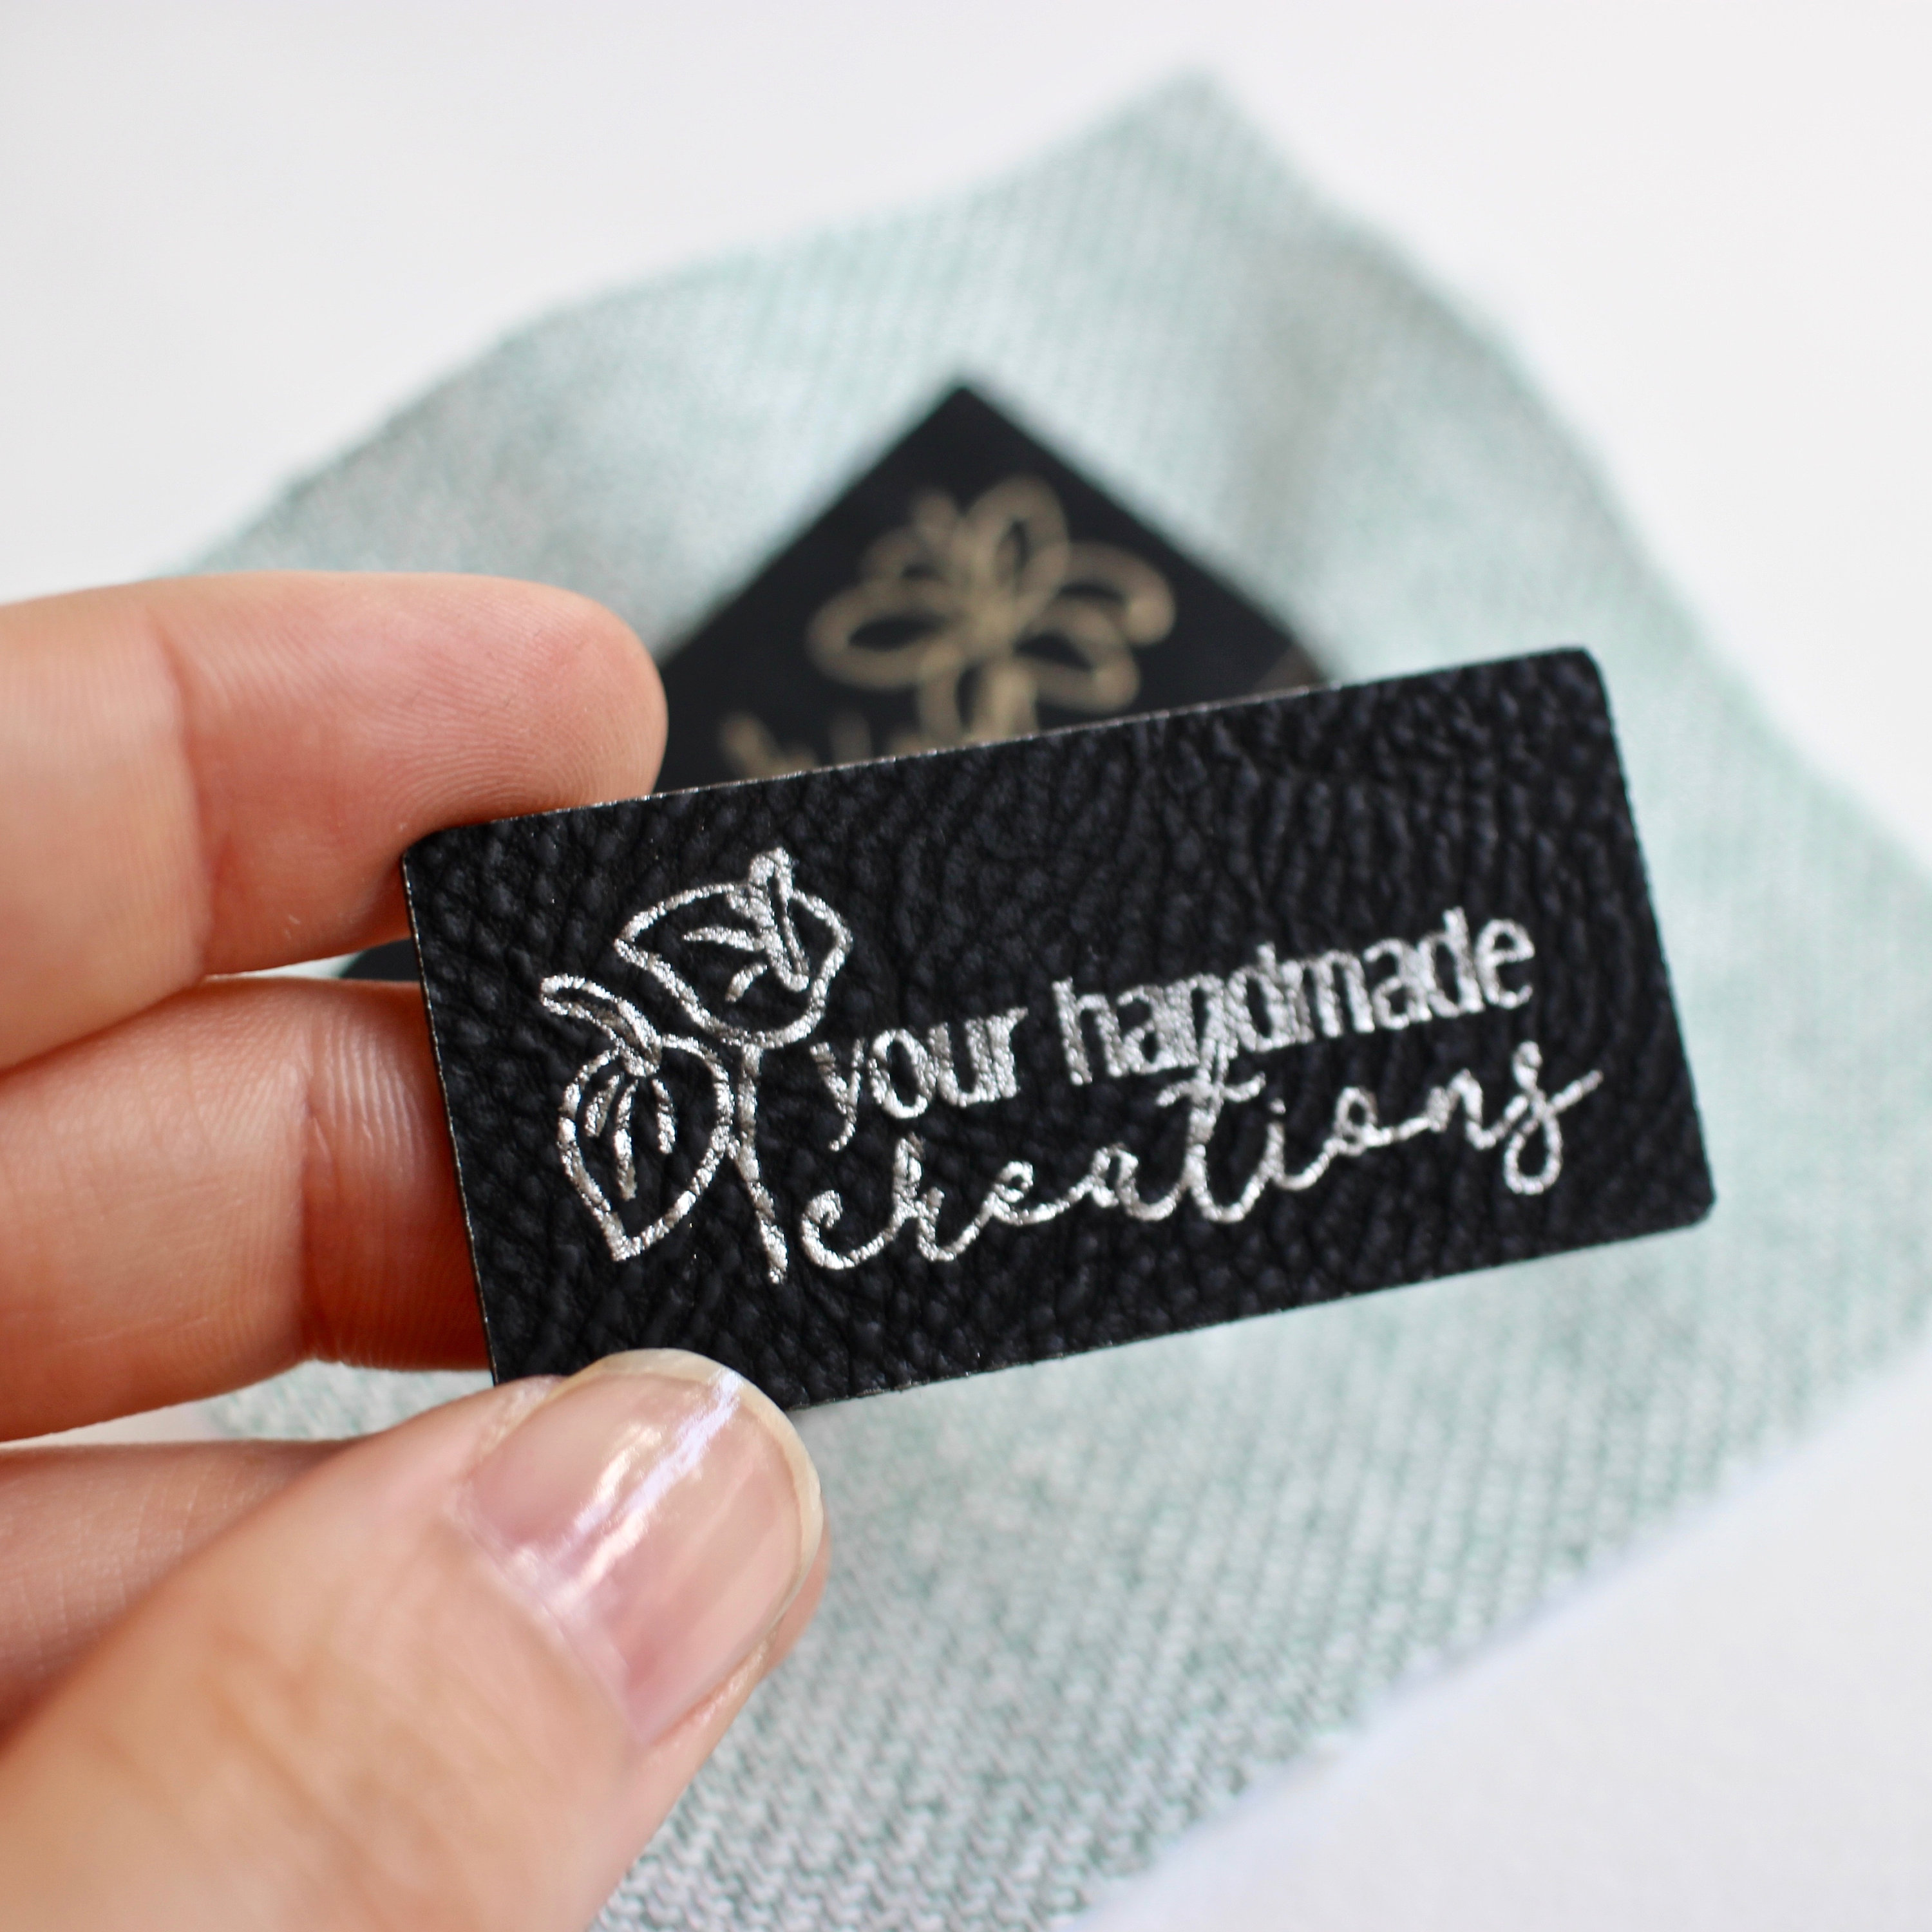 Black custom tags for handmade items - size 2x1 - Gold or Silver letters -  Personalize with custom logo or text.